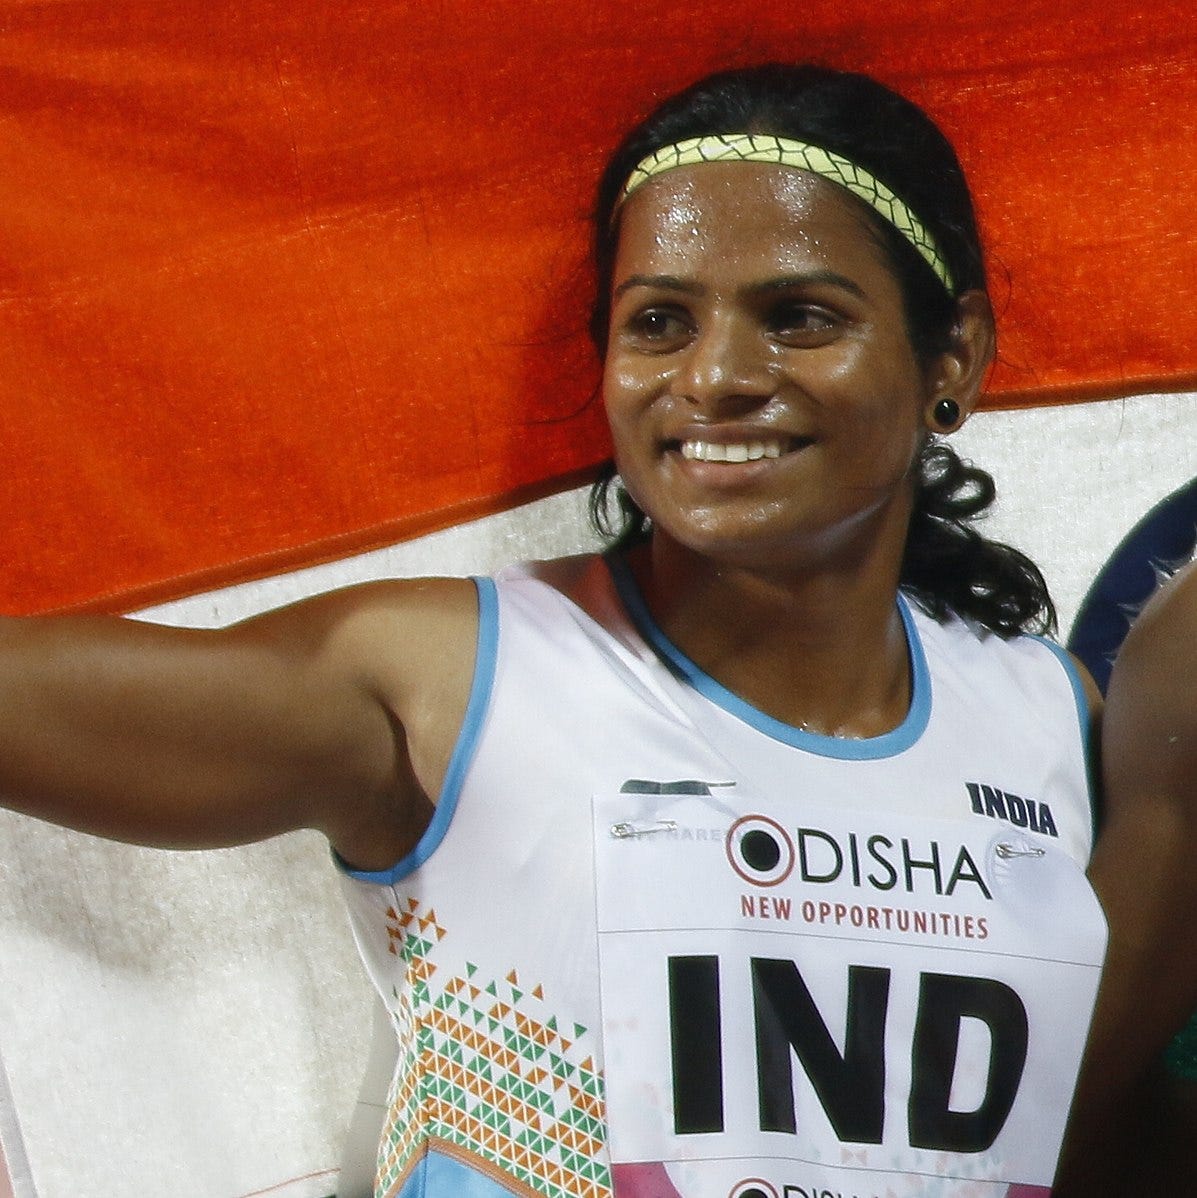 India's First Openly Gay Athlete, UK Olympian Stand Against Homophobia At Commonwealth Games